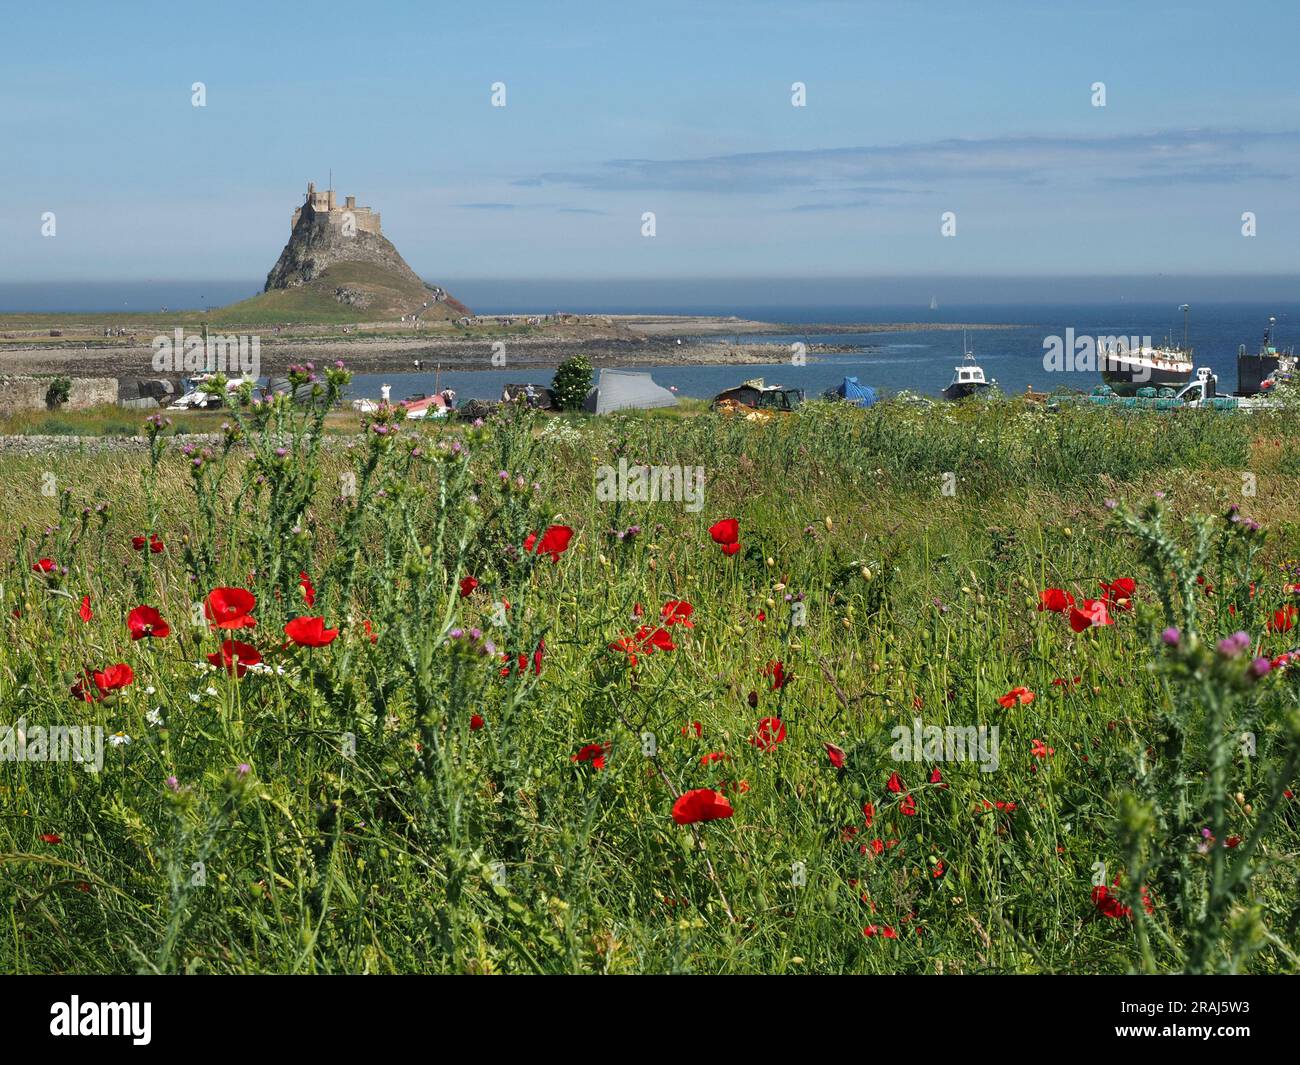 classic sunny view of Lindisfarne Castle on highest part of whinstone hill (Beblowe) beyond poppy field and boats Holy Island, Northumbria, England,UK Stock Photo